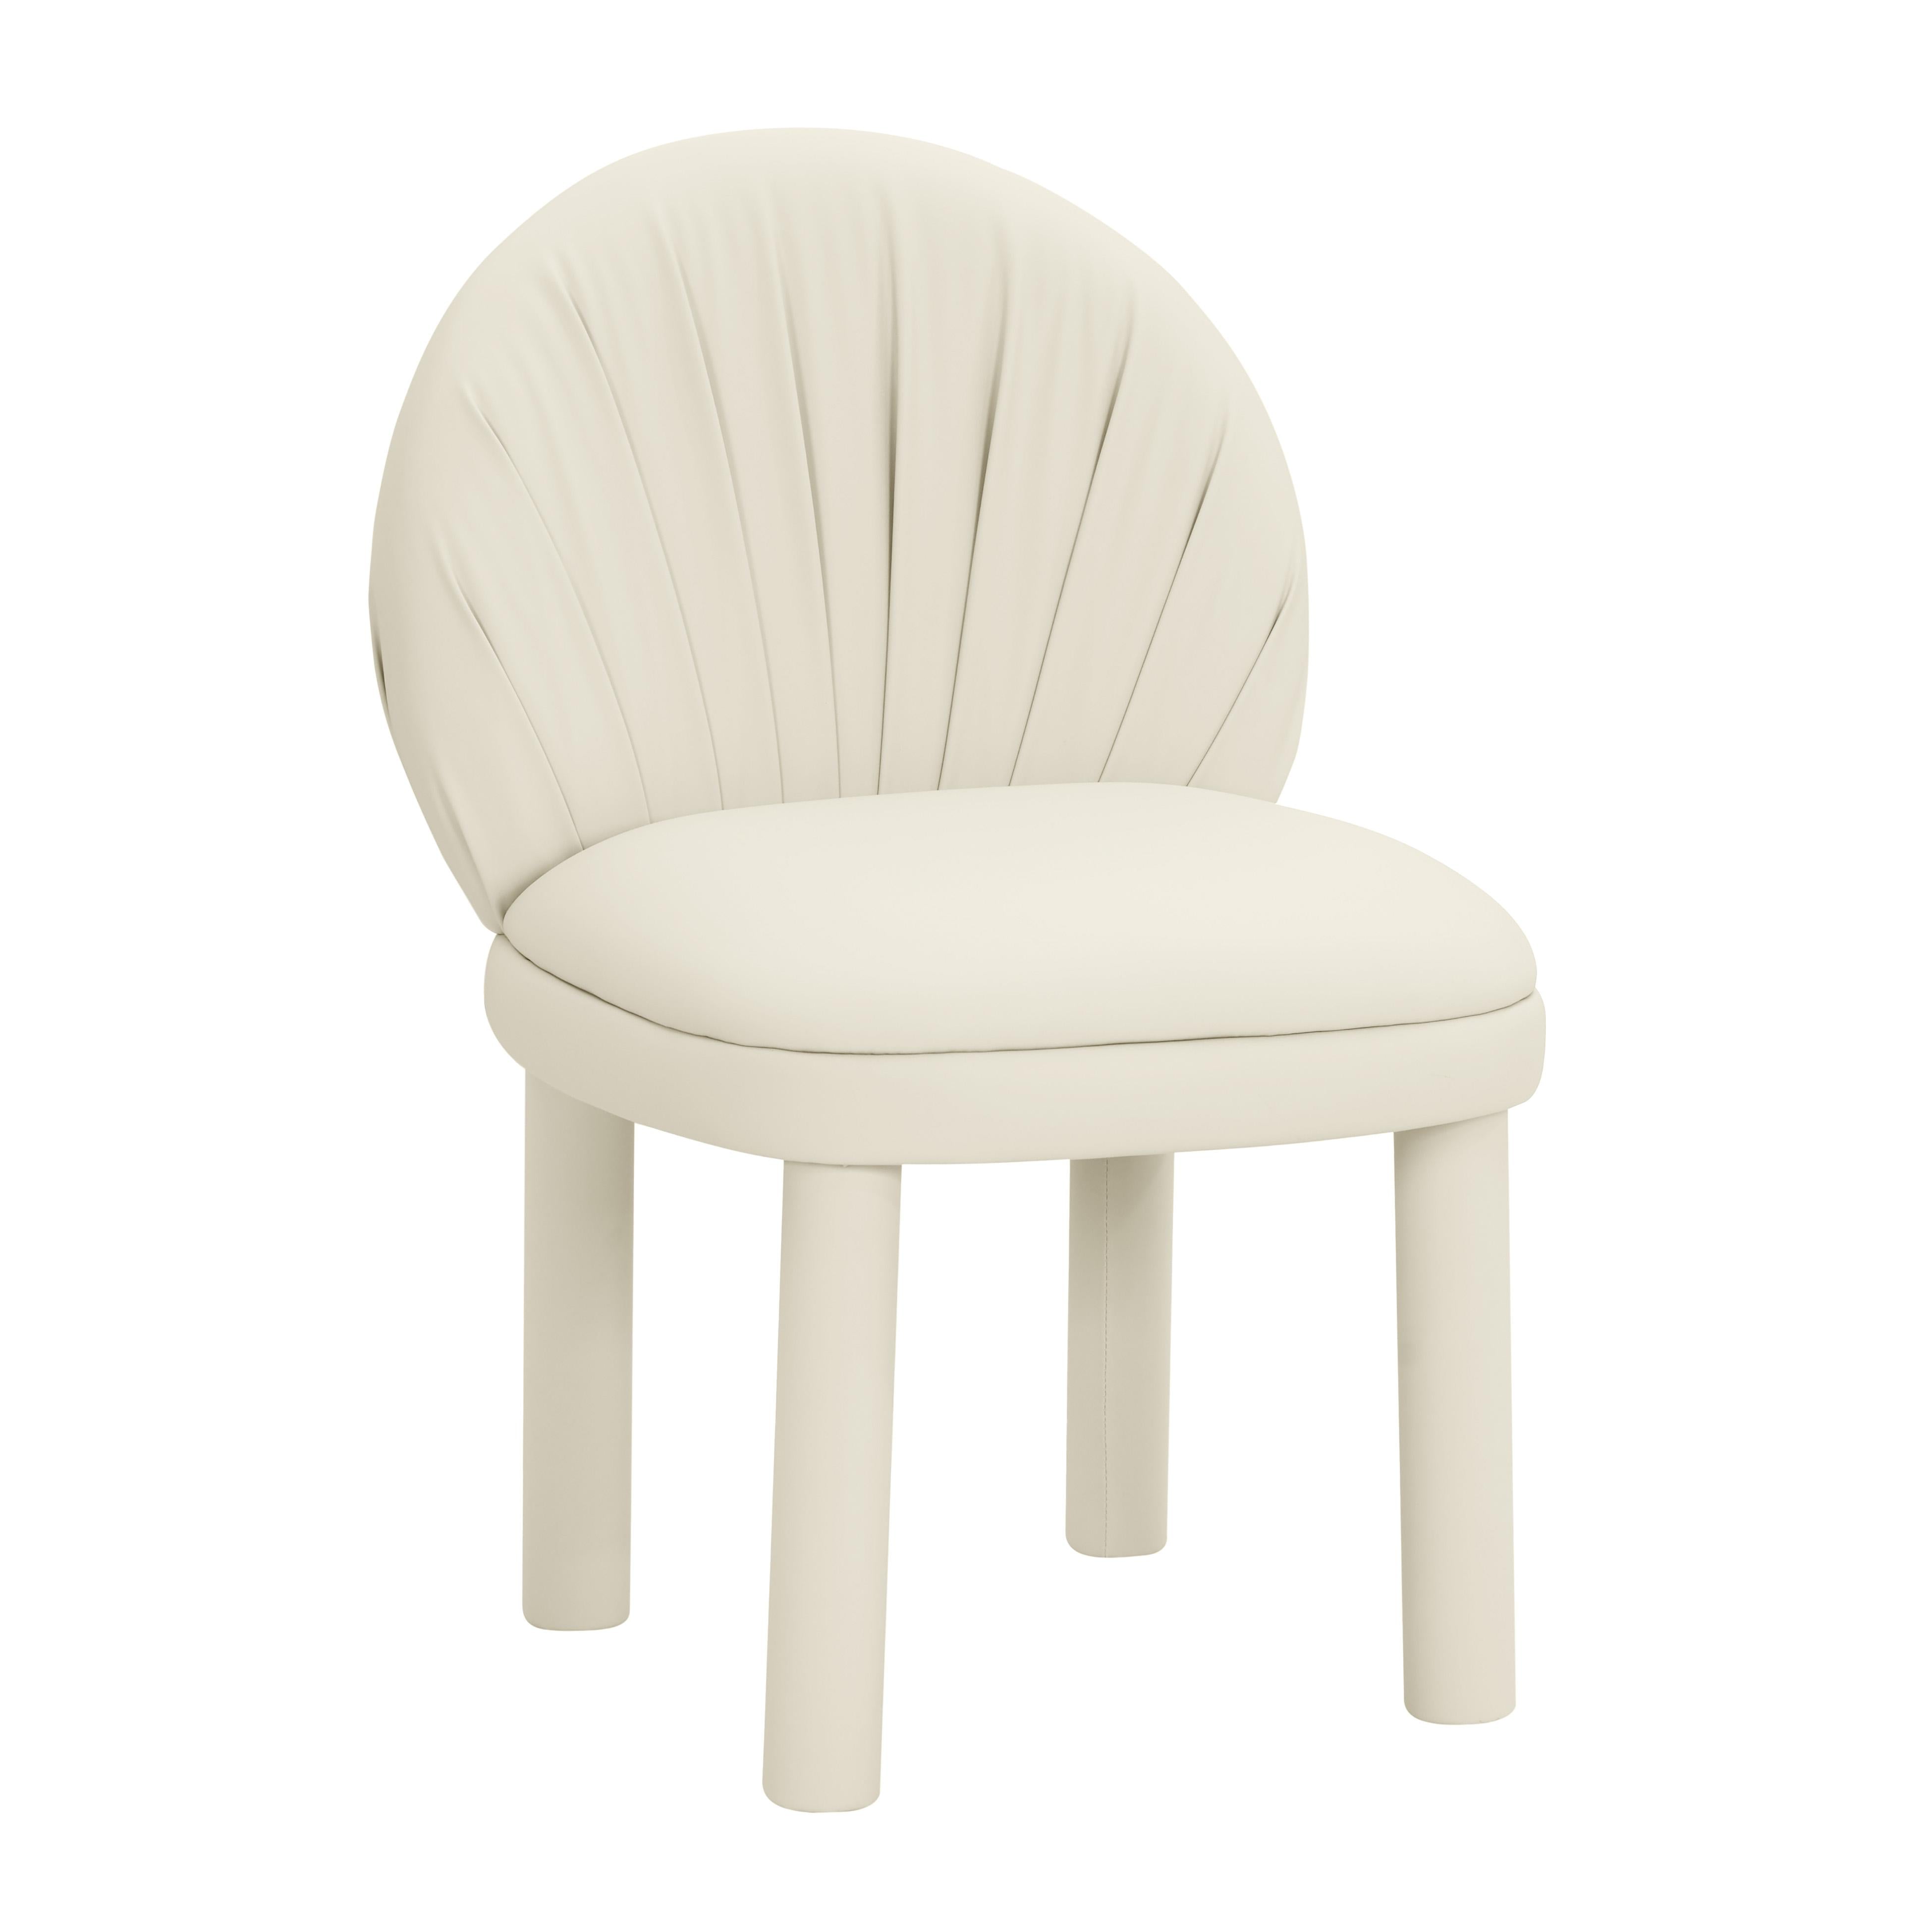 Tov Furniture Dining Chairs - Aliyah Cream Vegan Leather Dining Chair